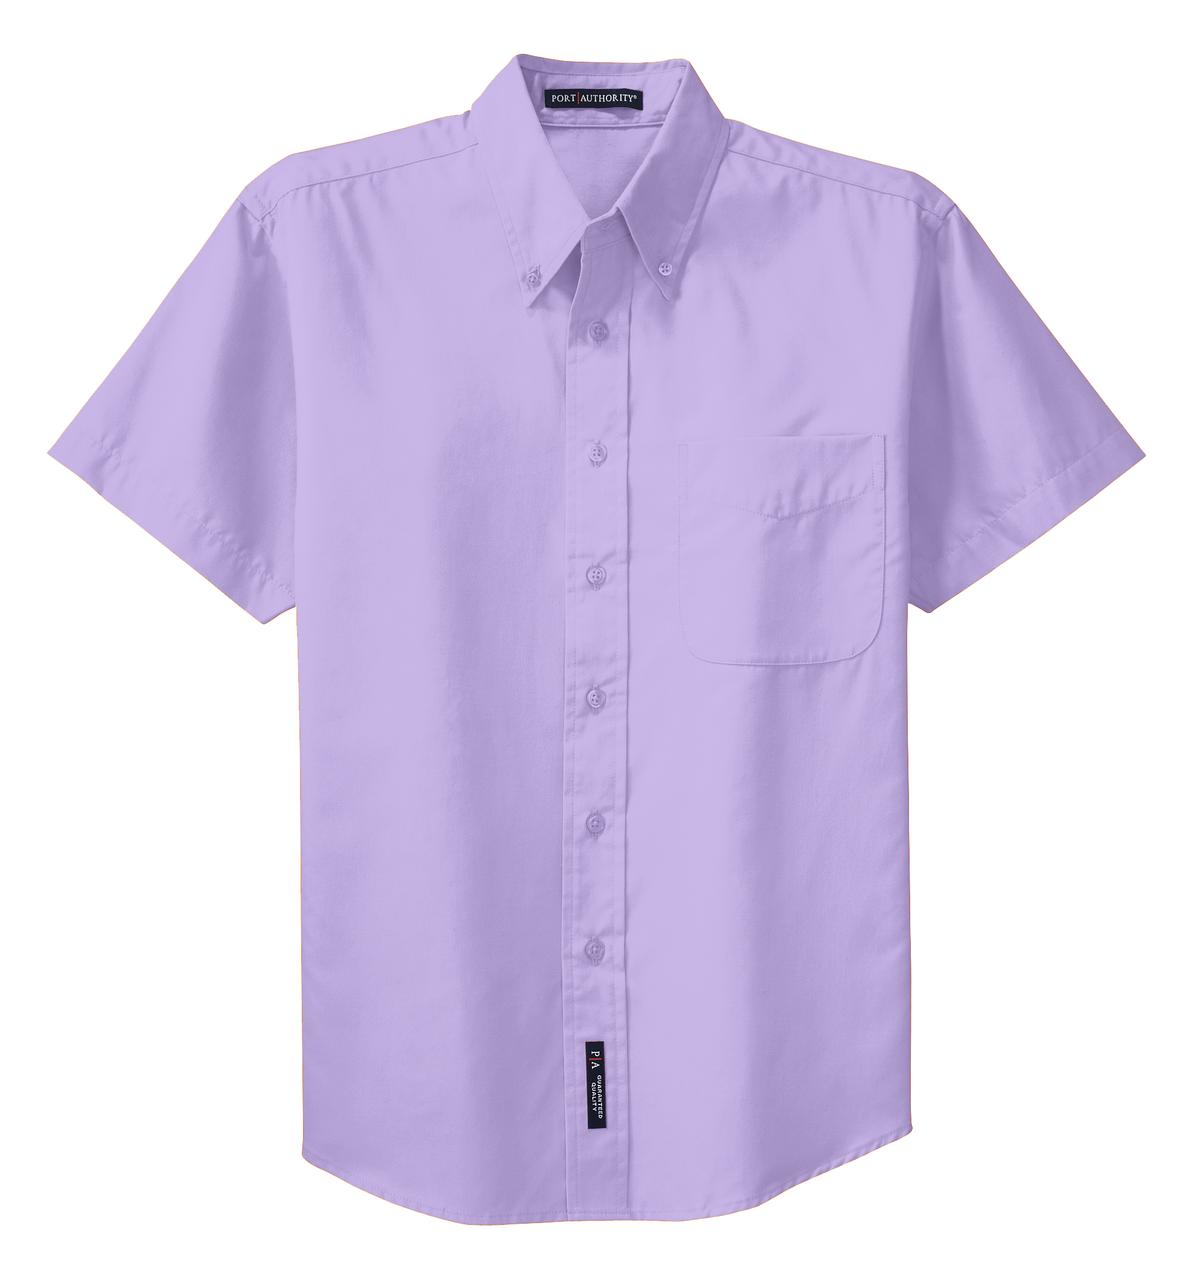 Port Authority® Short Sleeve Easy Care Shirt (Light Colors) S508